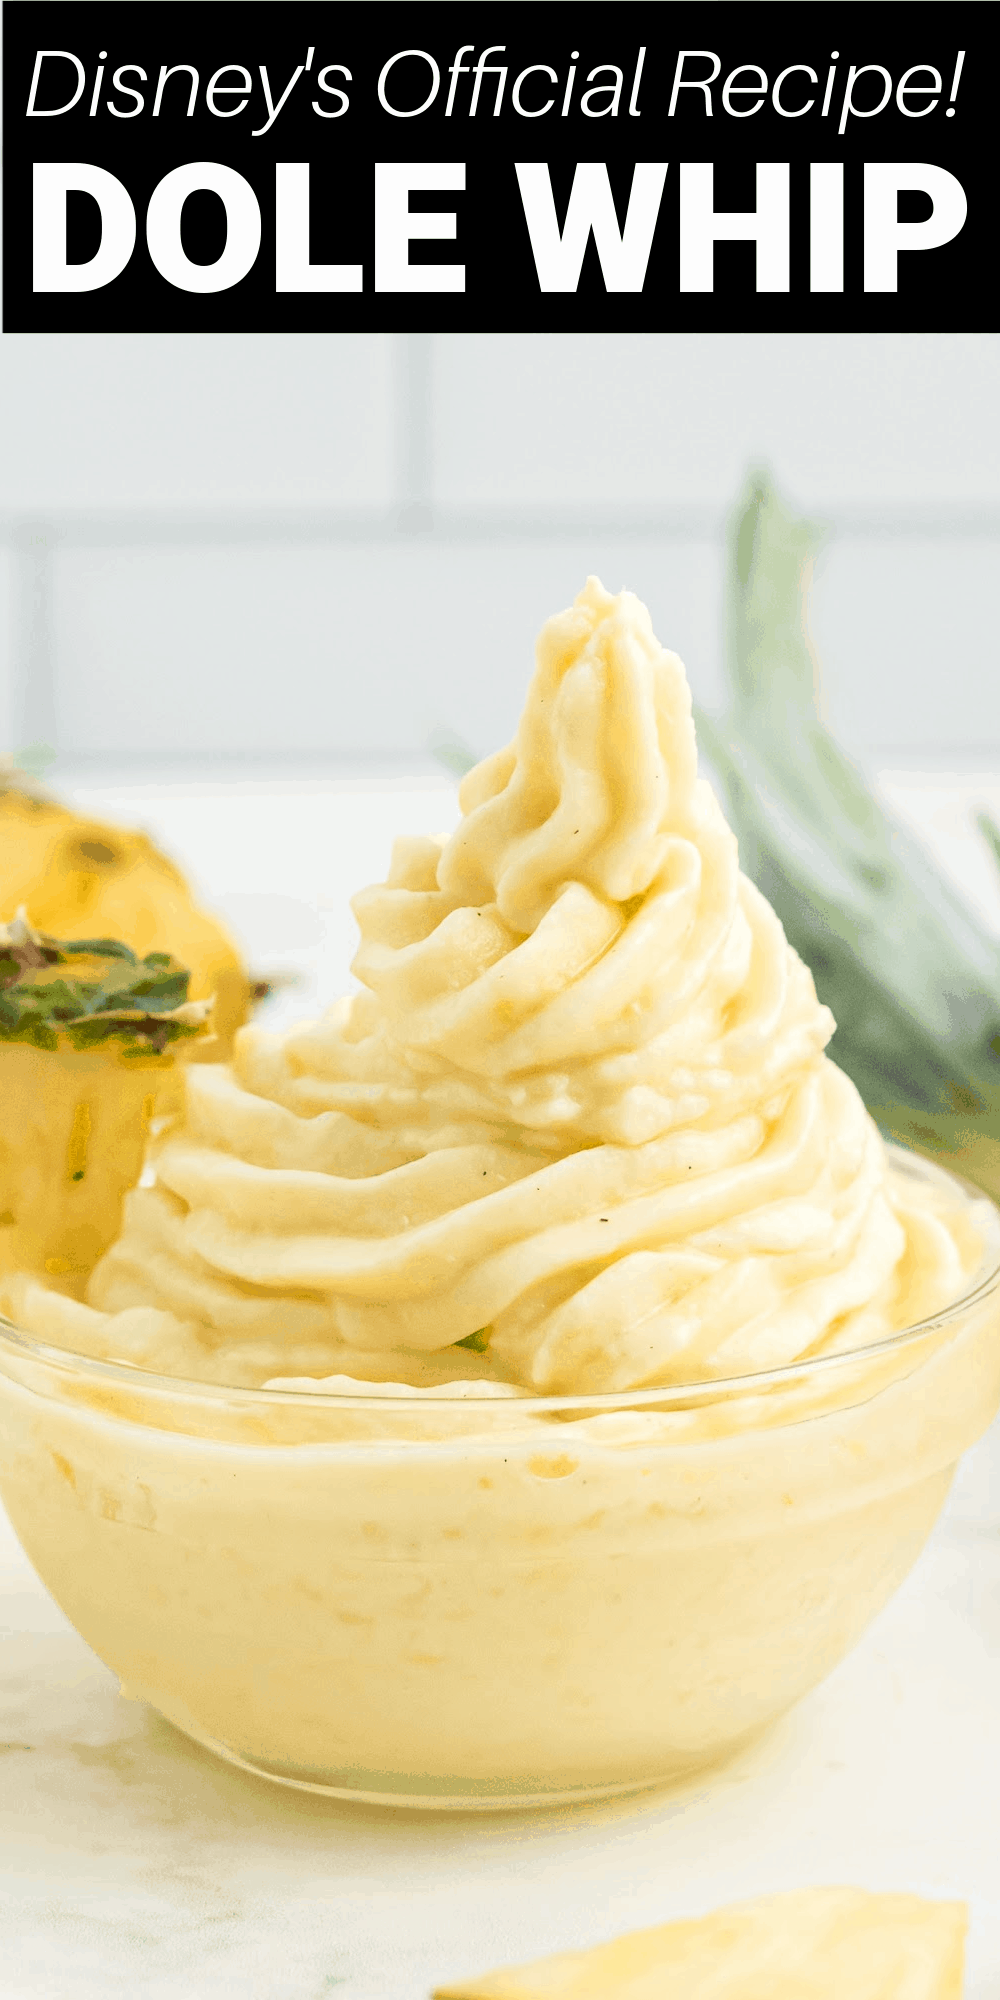 The Disney Dole Whip Recipe is a special treat when visiting one of the Walt Disney World theme parks, but now you can make this classic pineapple dole whip at home with just three ingredients!